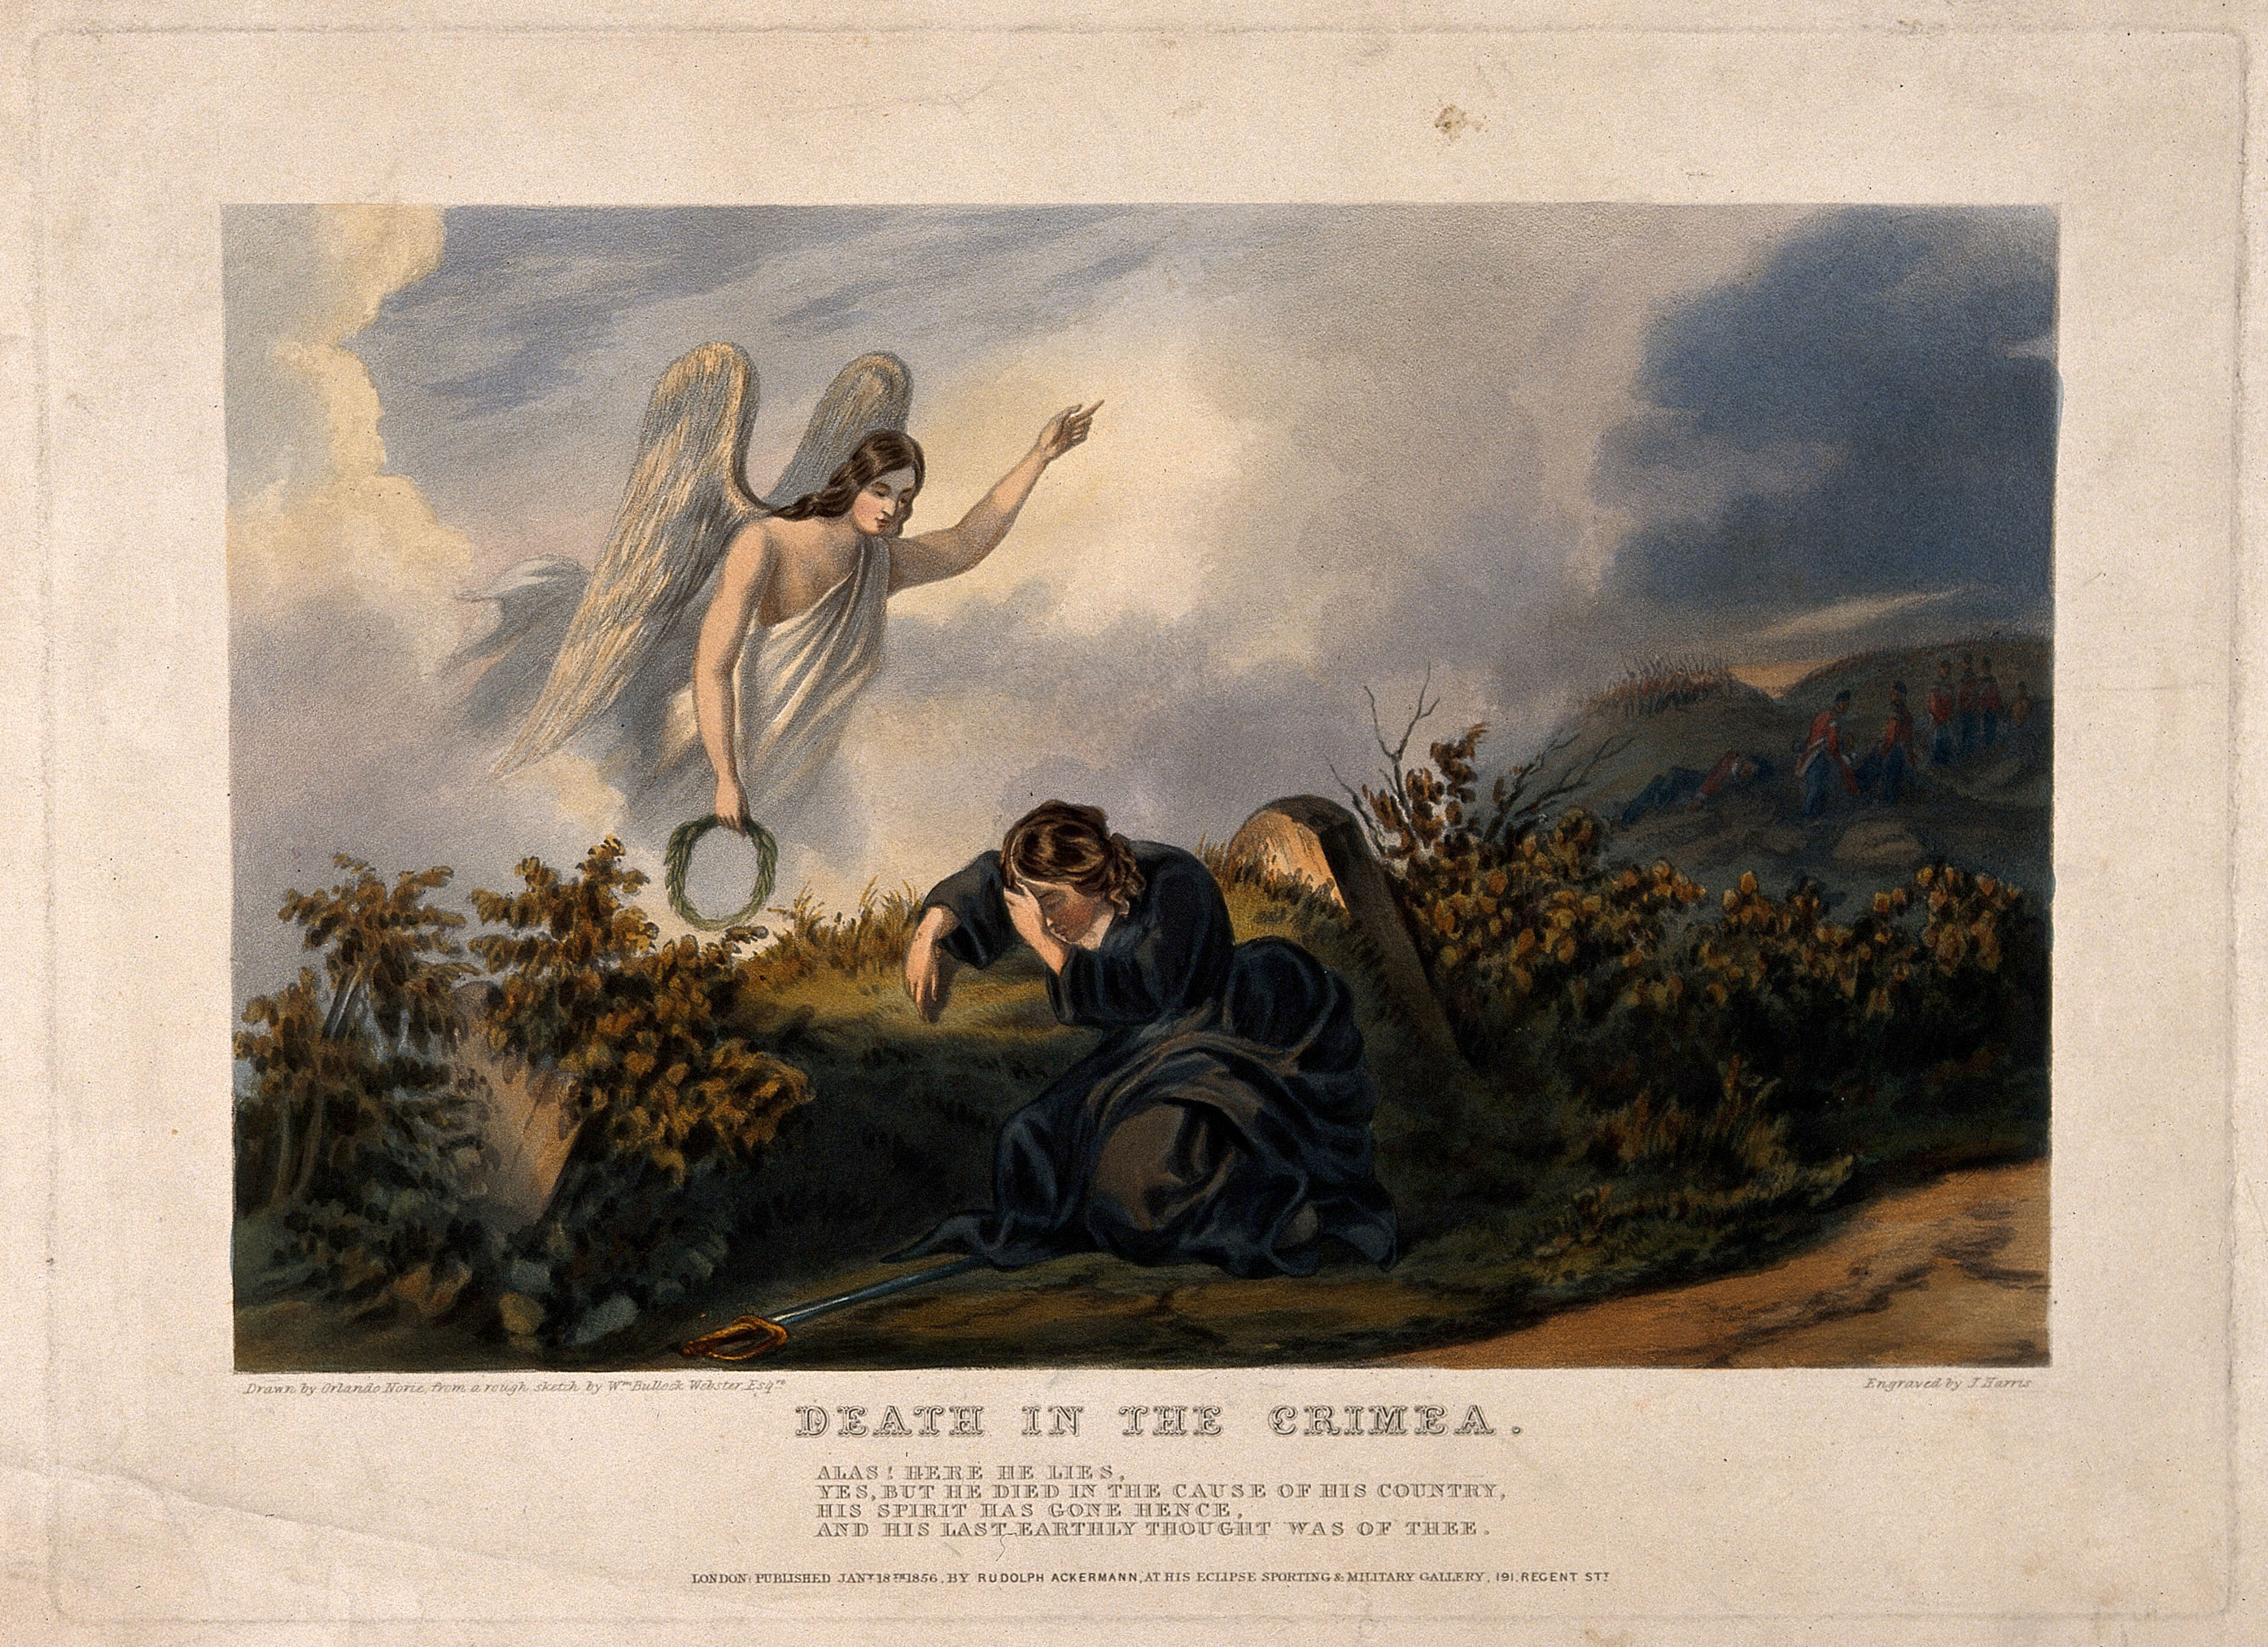 Crimean War: a guardian angel appearing to a widow mourning the death of her husband on the battlefield. Coloured aquatint by J. Harris, 1856, after O. Norie and W. Bullock Webster.